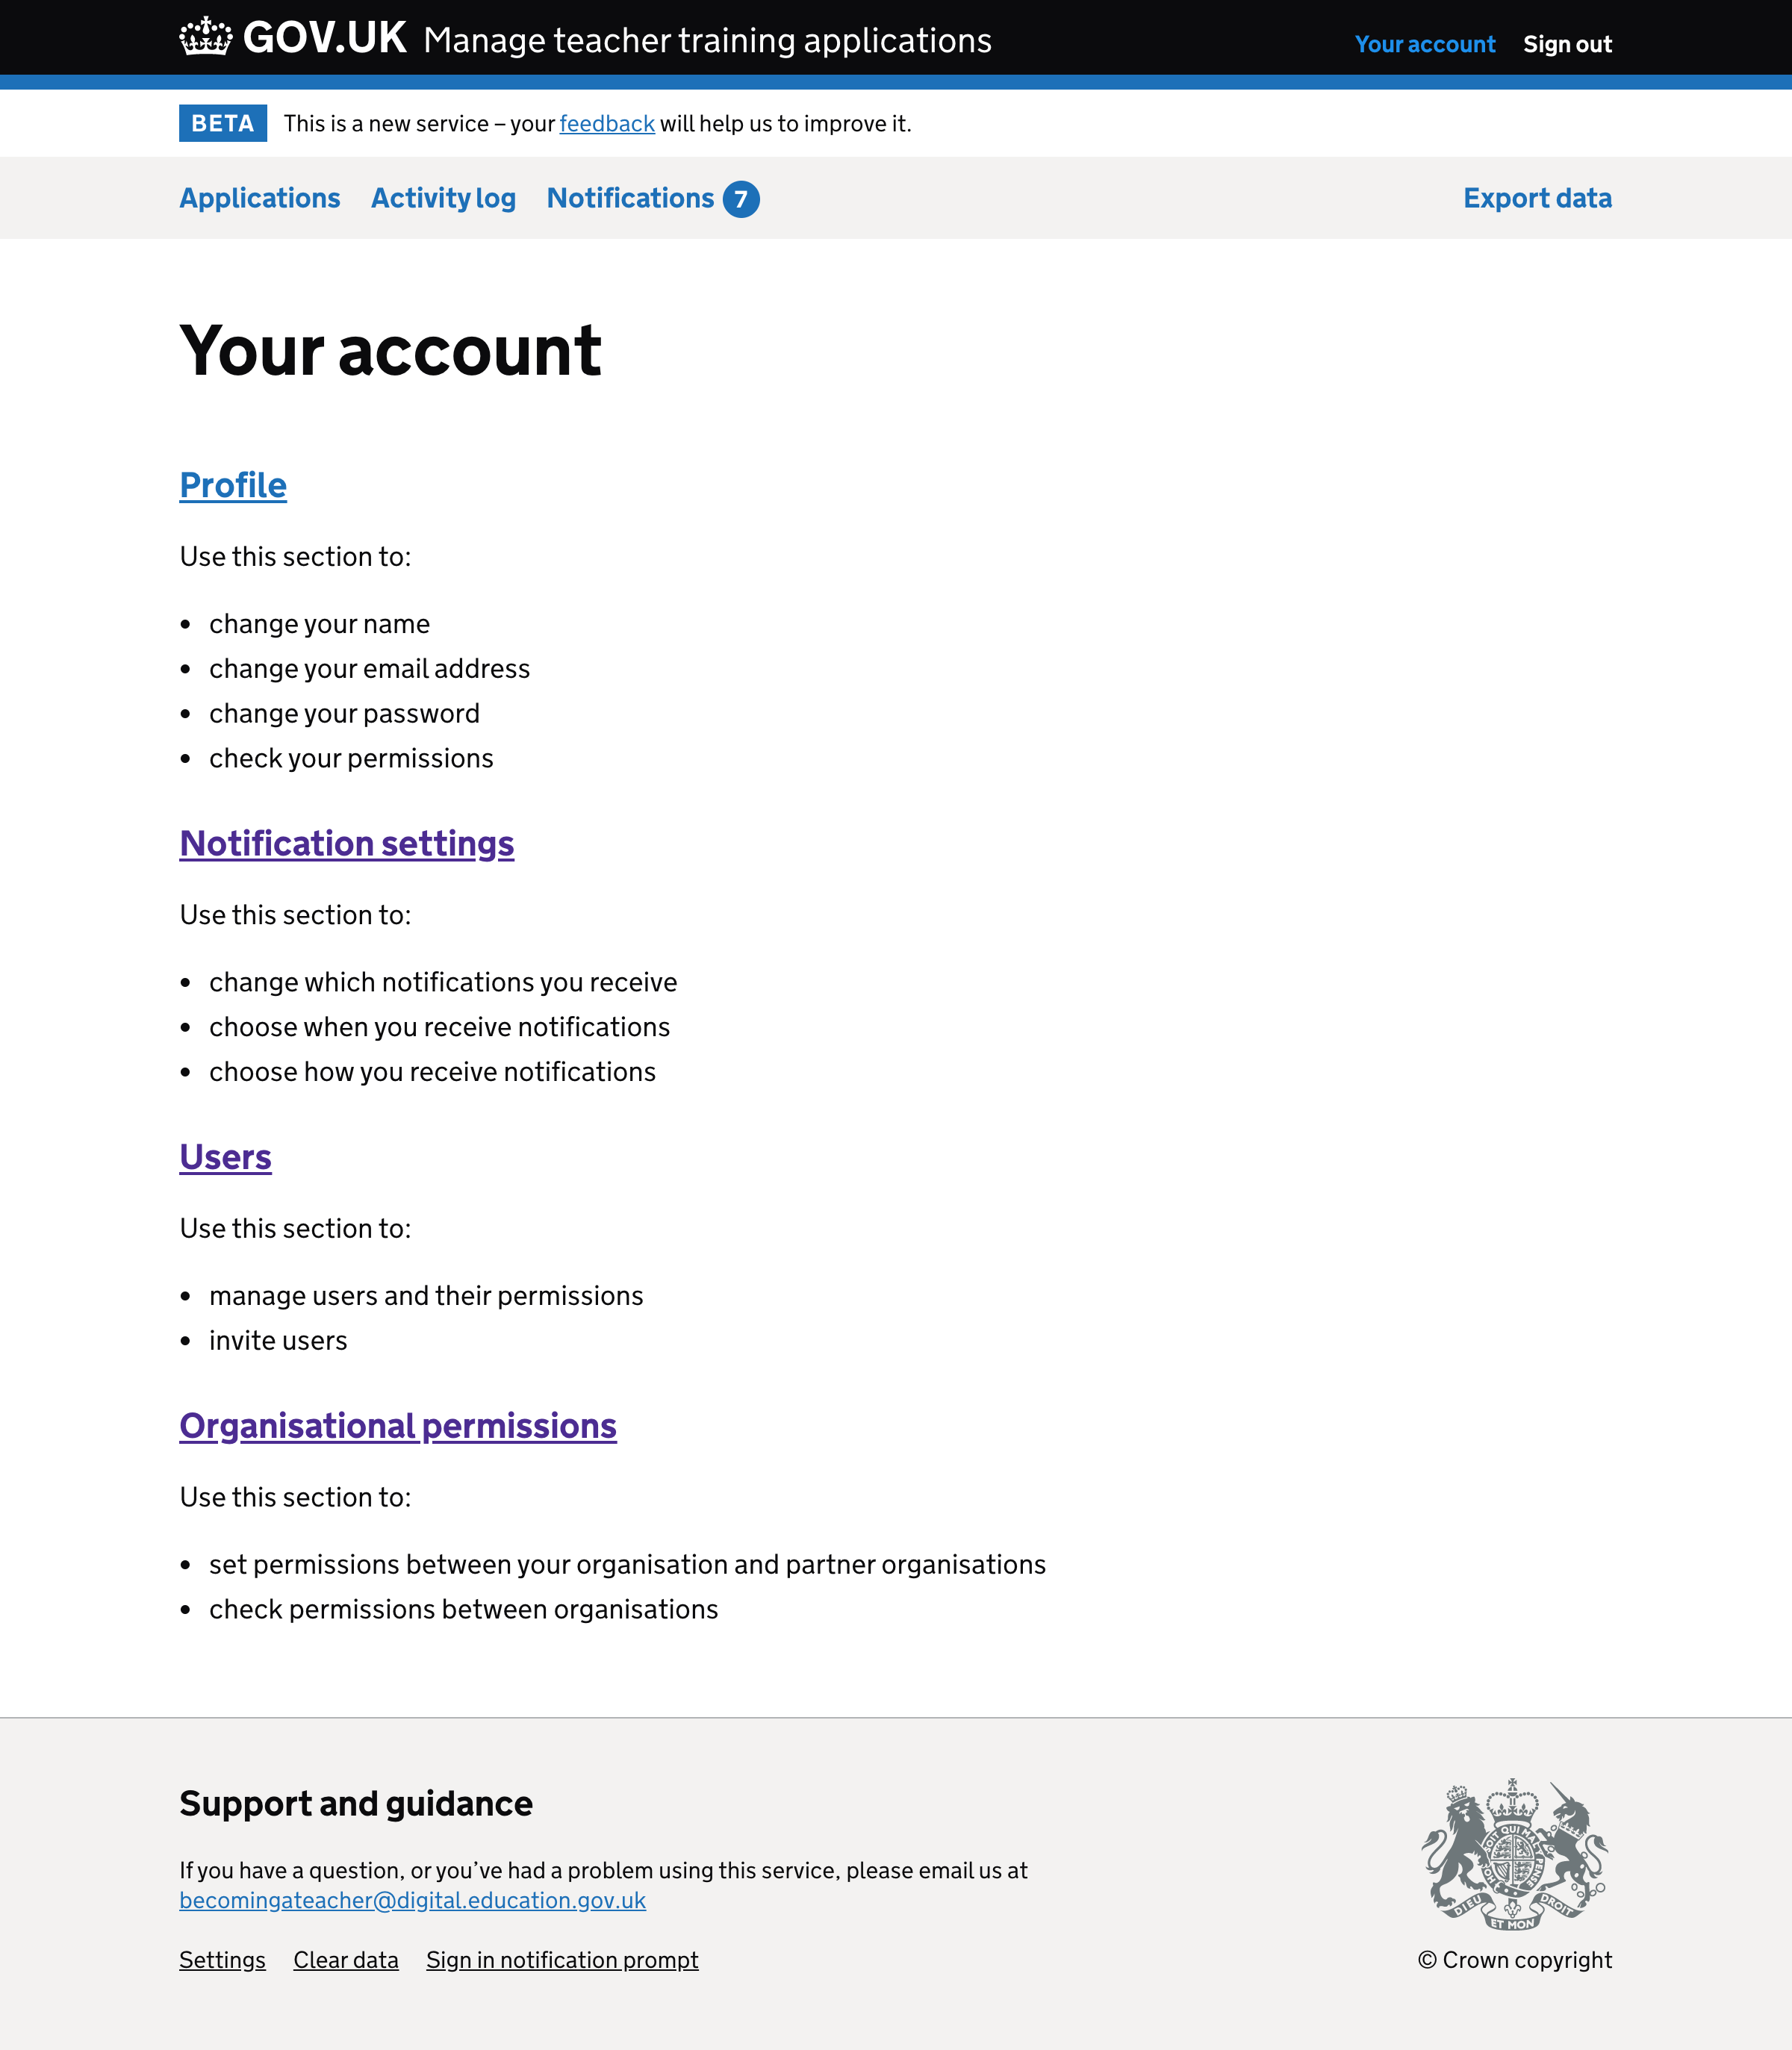 Screenshot of ‘Your account’ page.